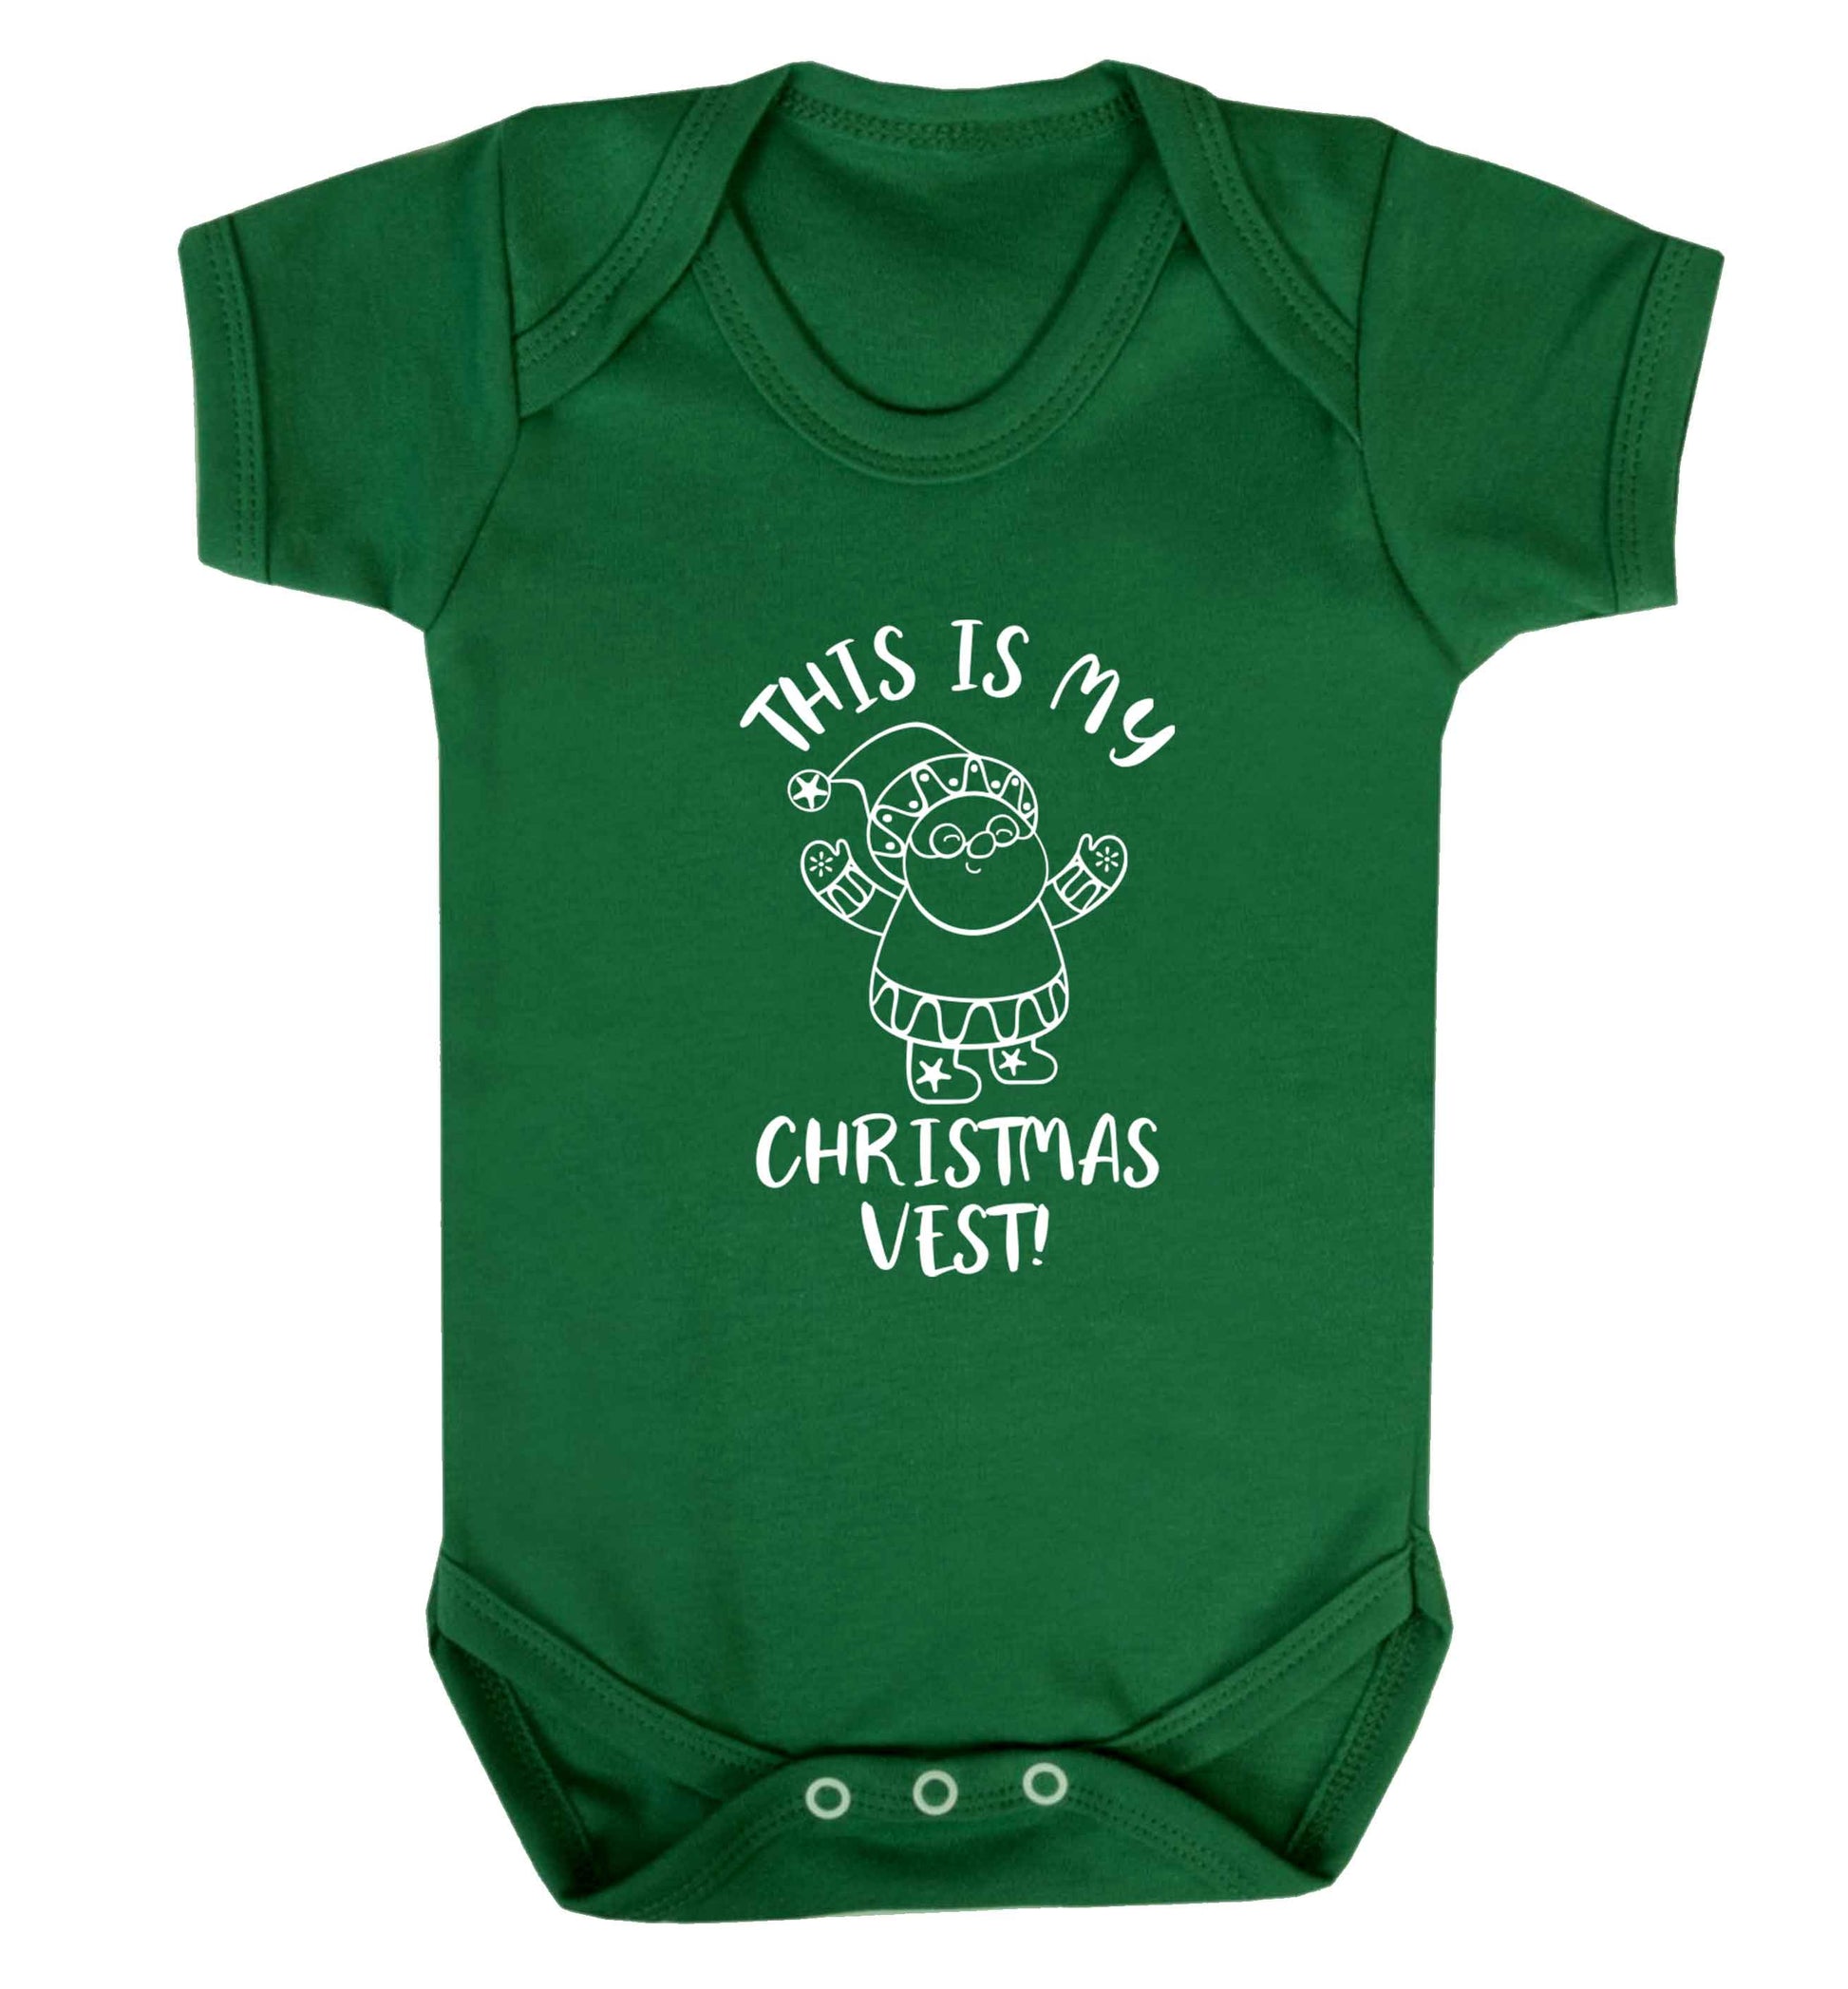 This is my Christmas vest Baby Vest green 18-24 months